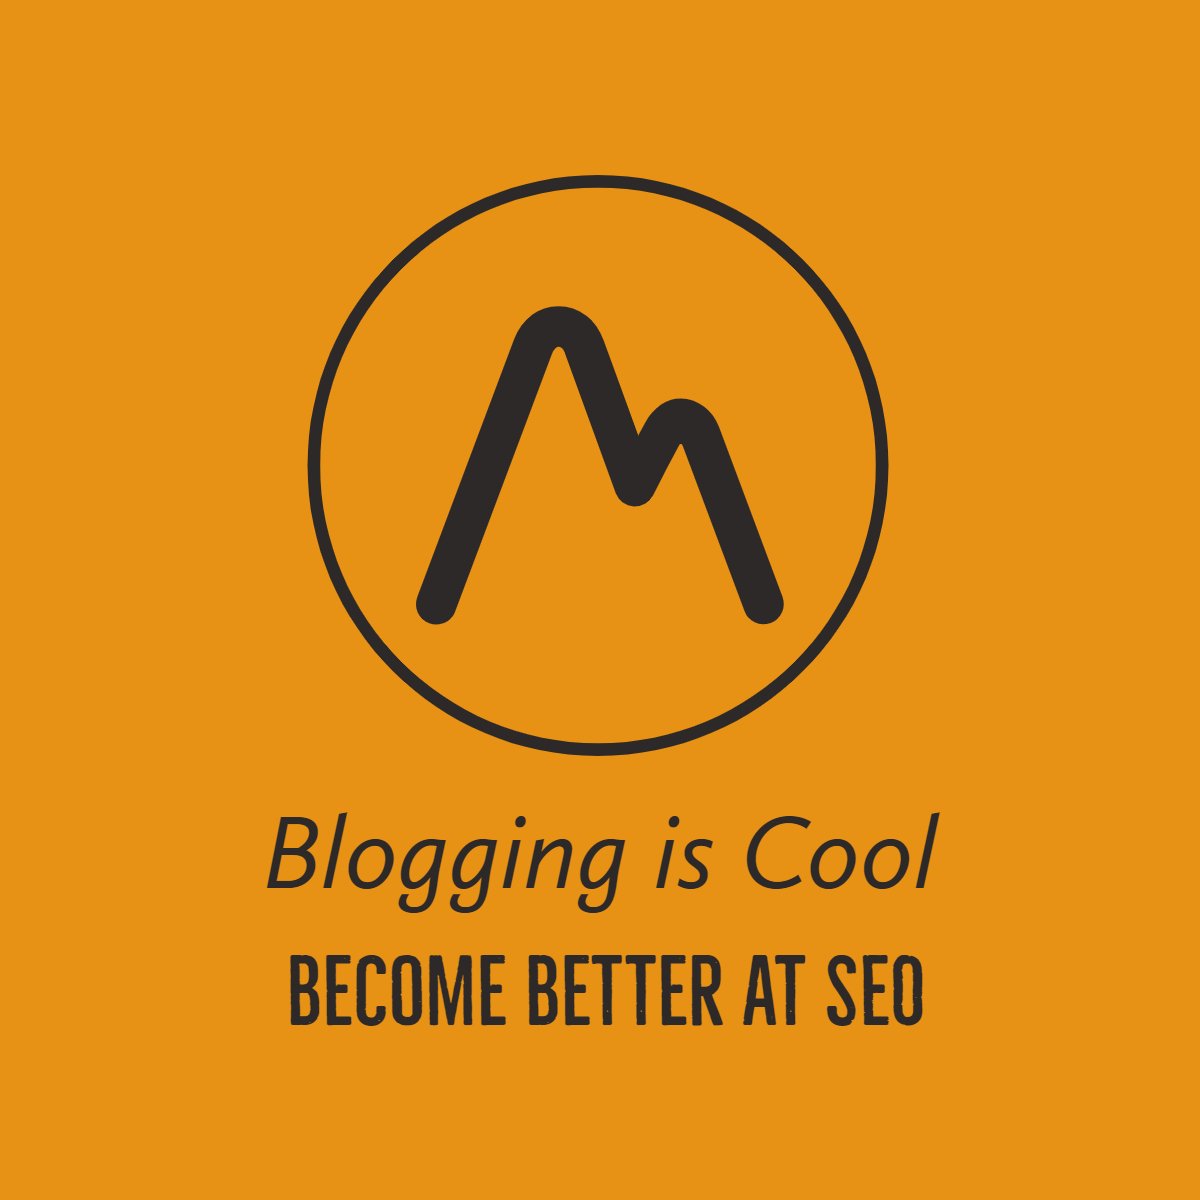 Bloggingiscool.com How to Optimize Your Blog for Search Engines